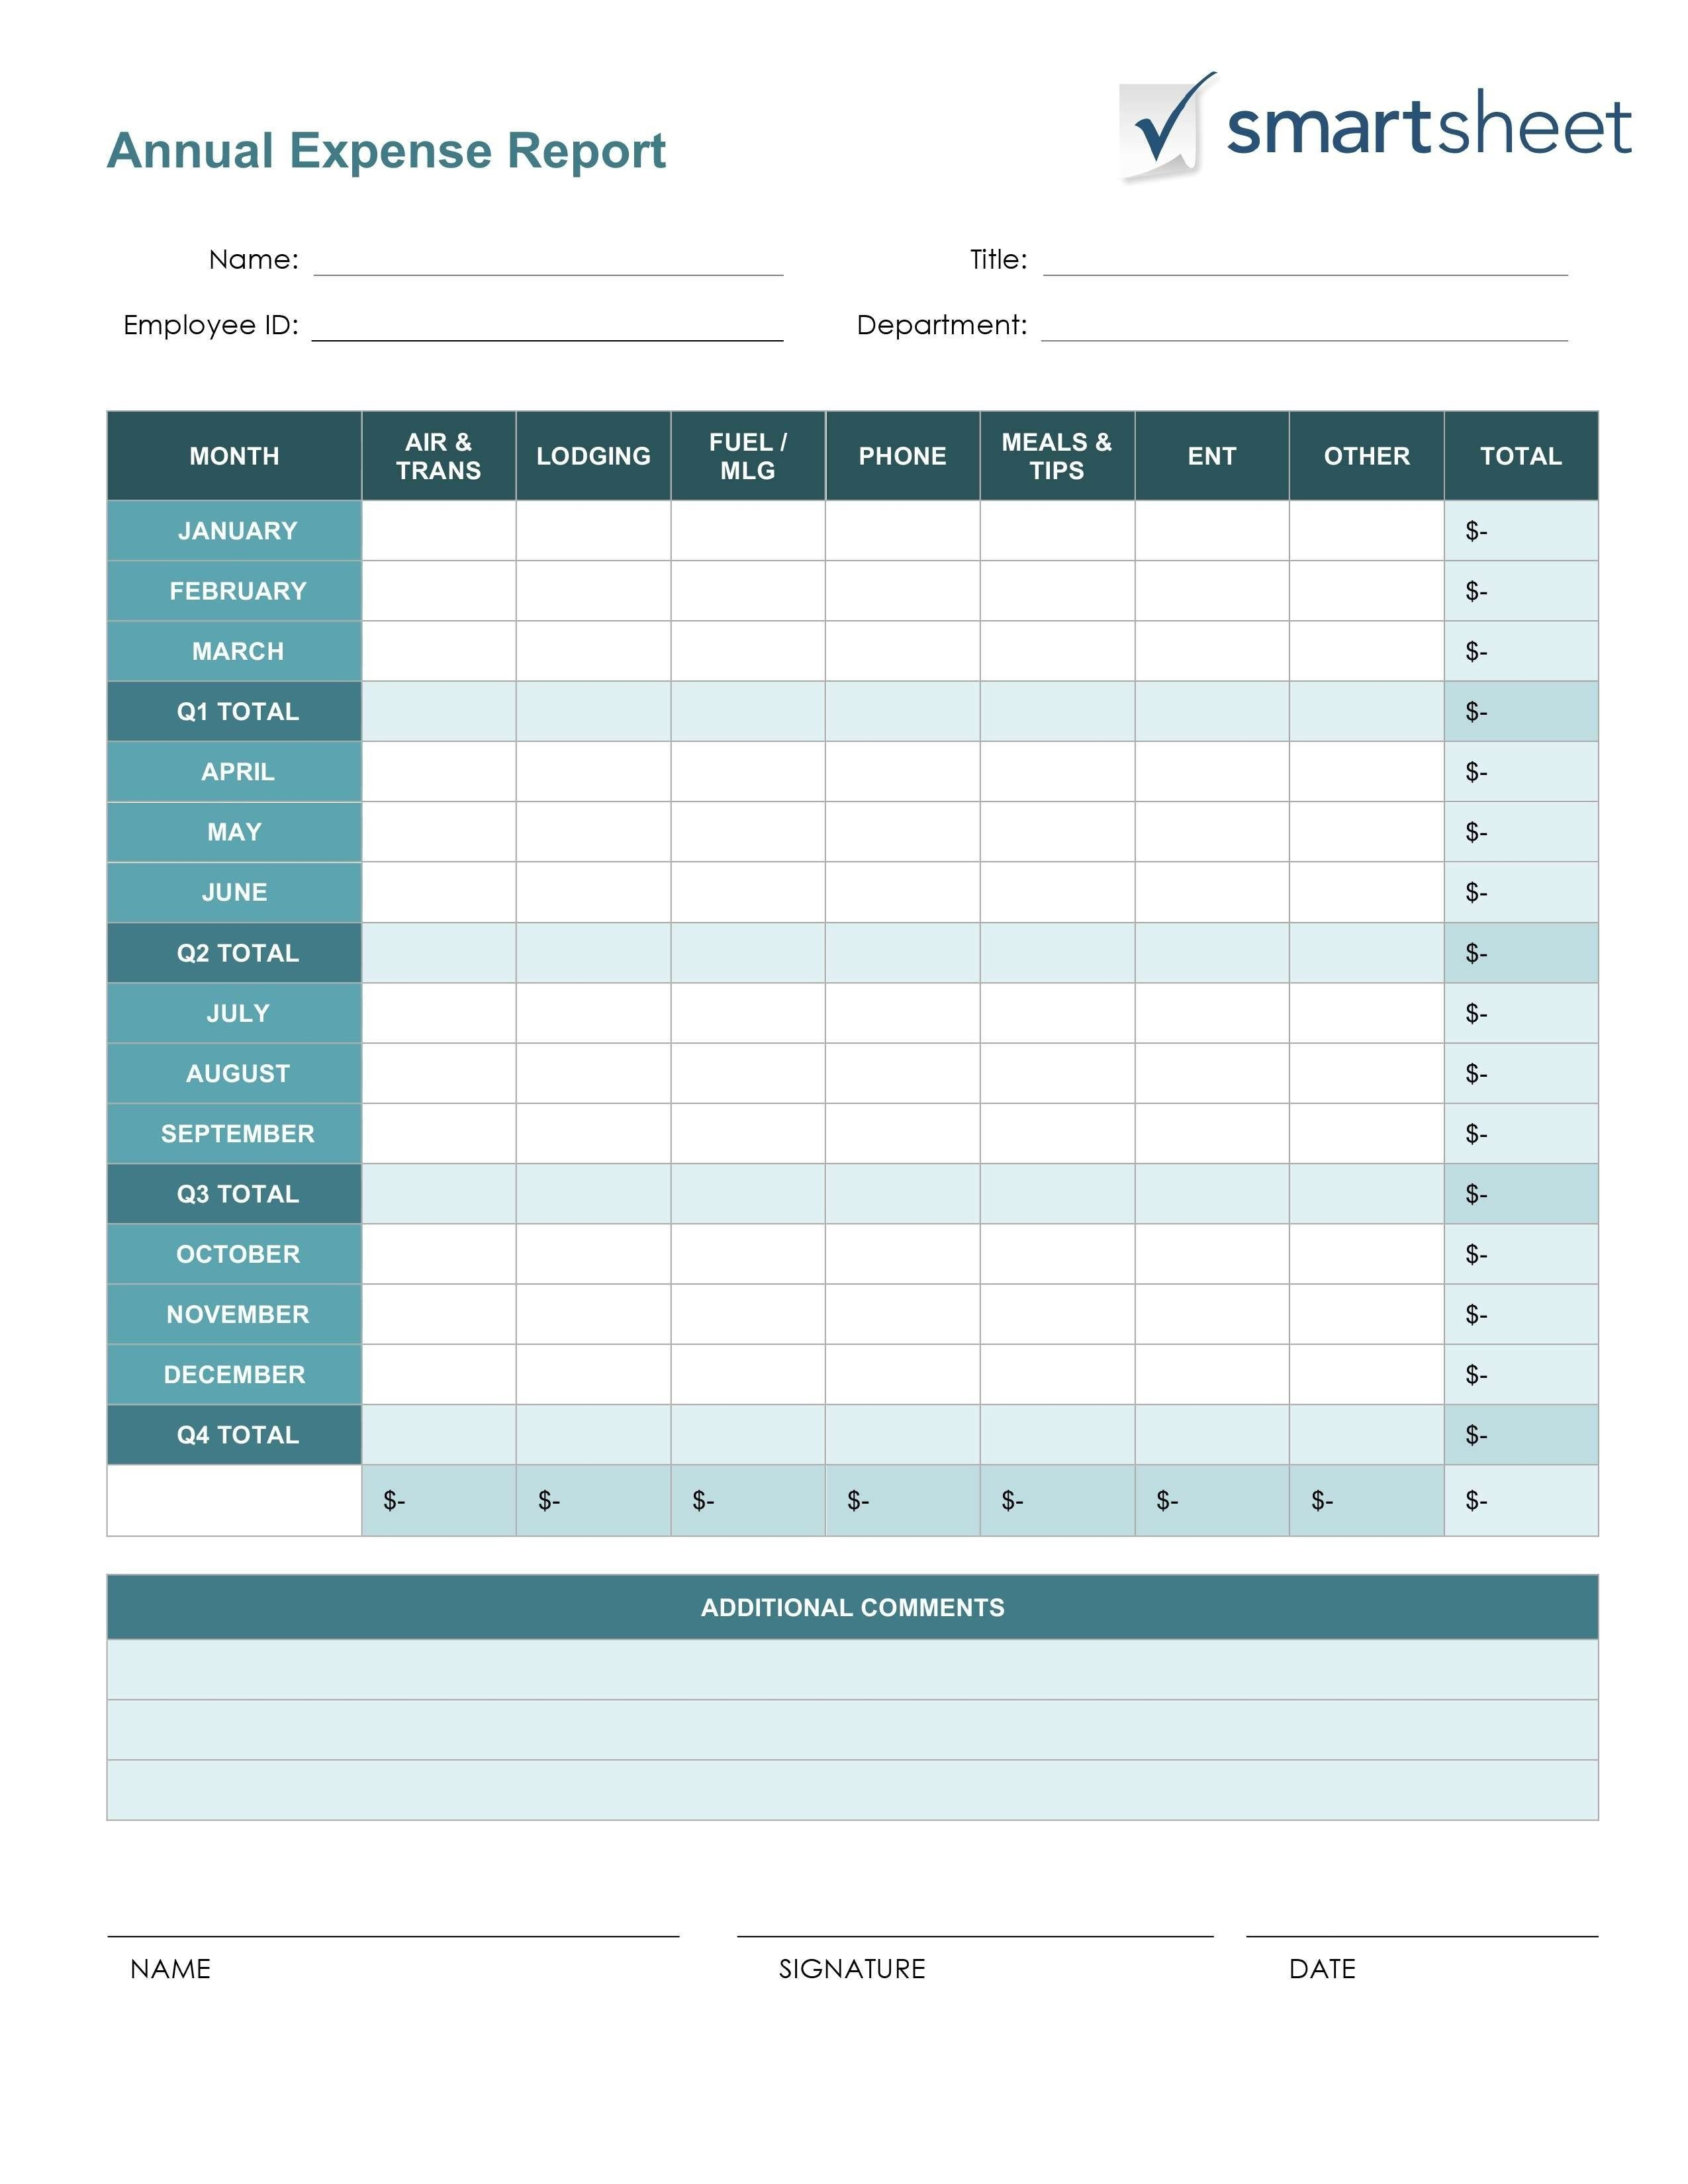 New Expenses Excel #exceltemplate #xls #xlstemplate Throughout Expense Report Template Xls